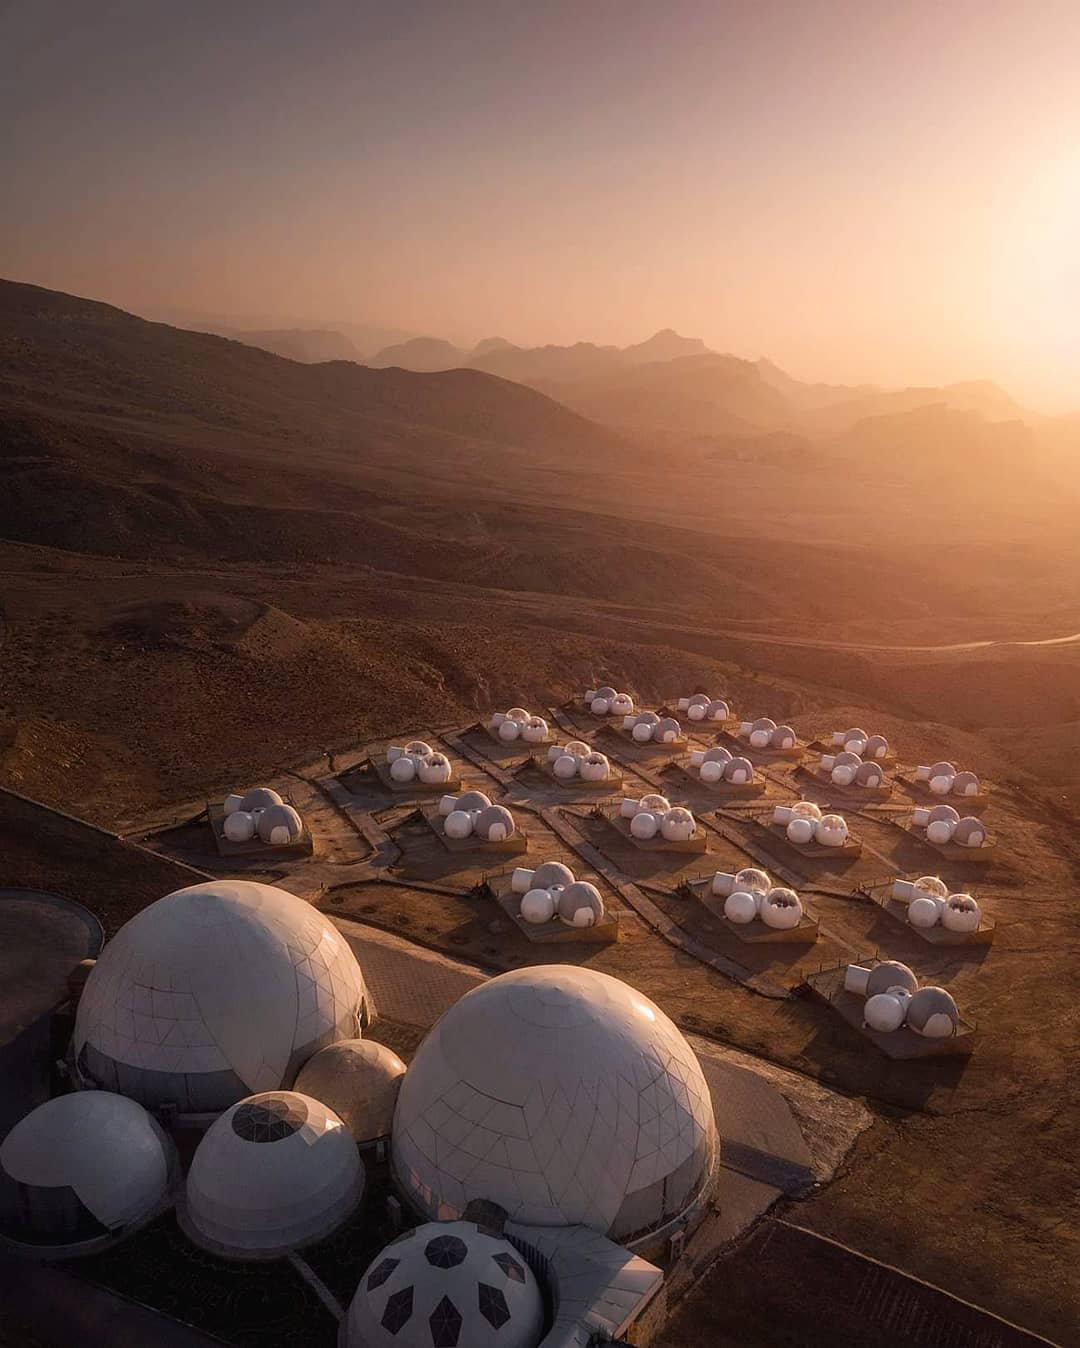 This hotel in Jordan looks like mars colony.png